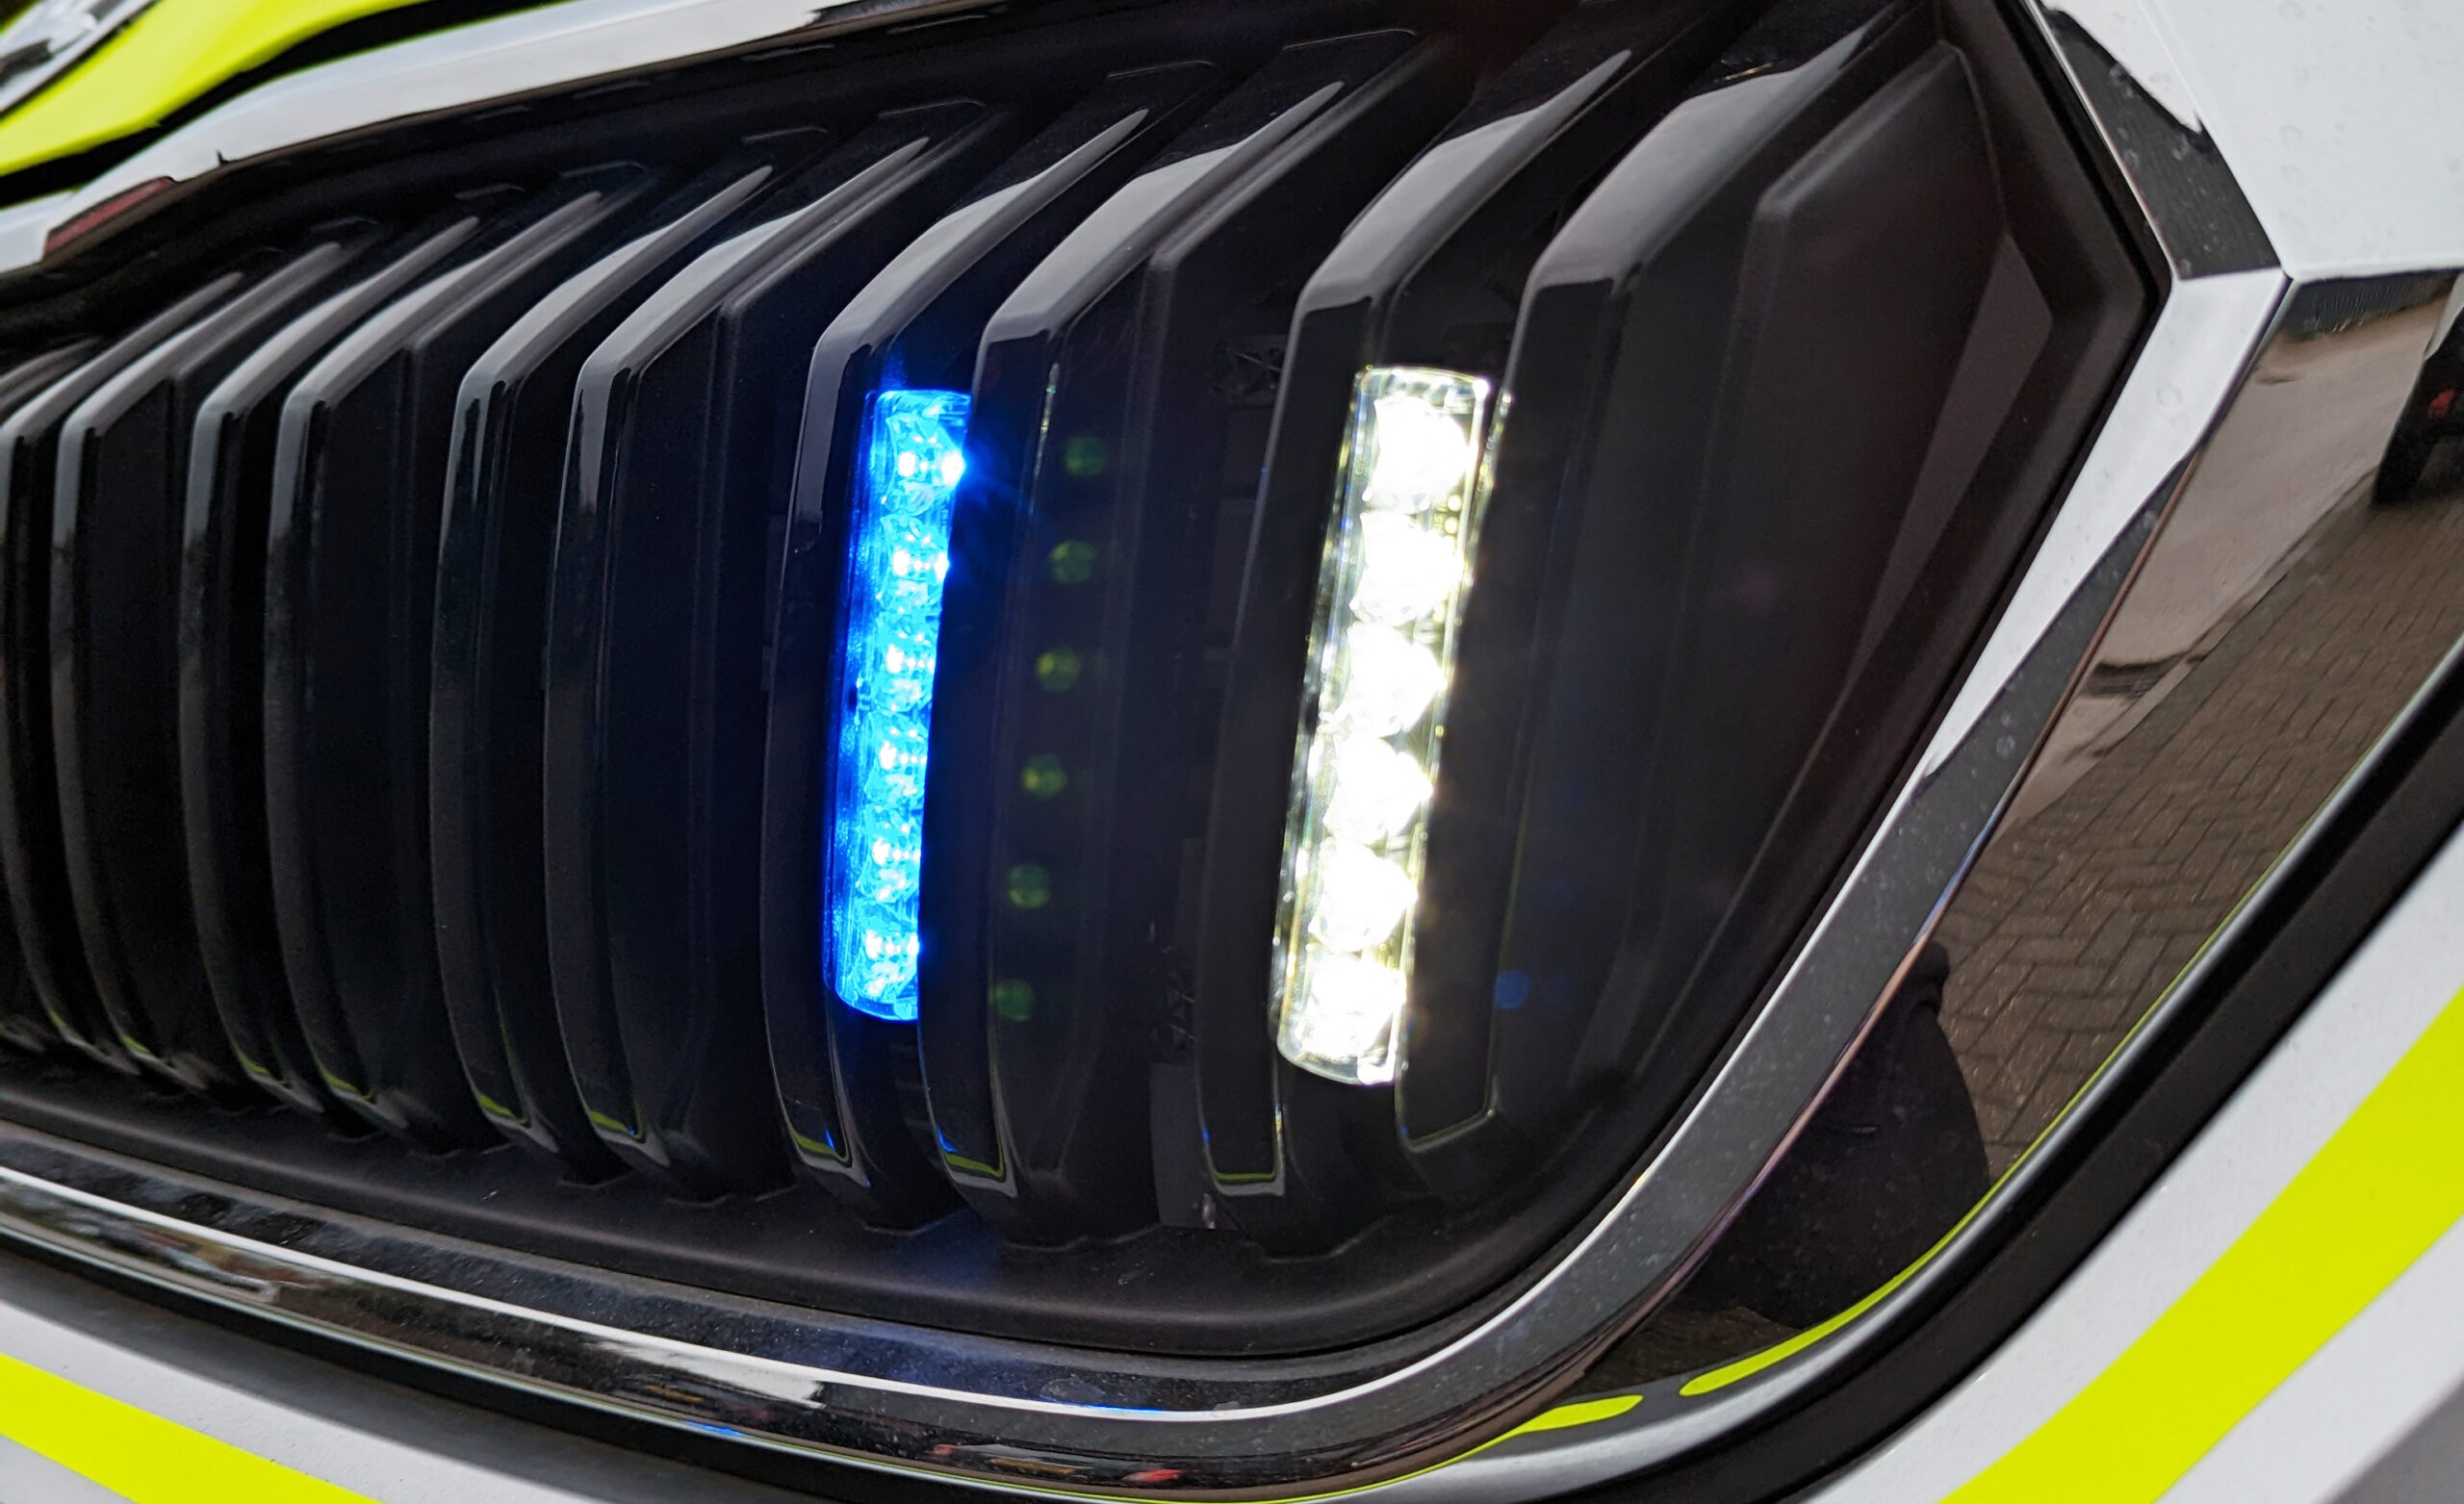 Closely Cropped Shot of Blue and White Grille Lights